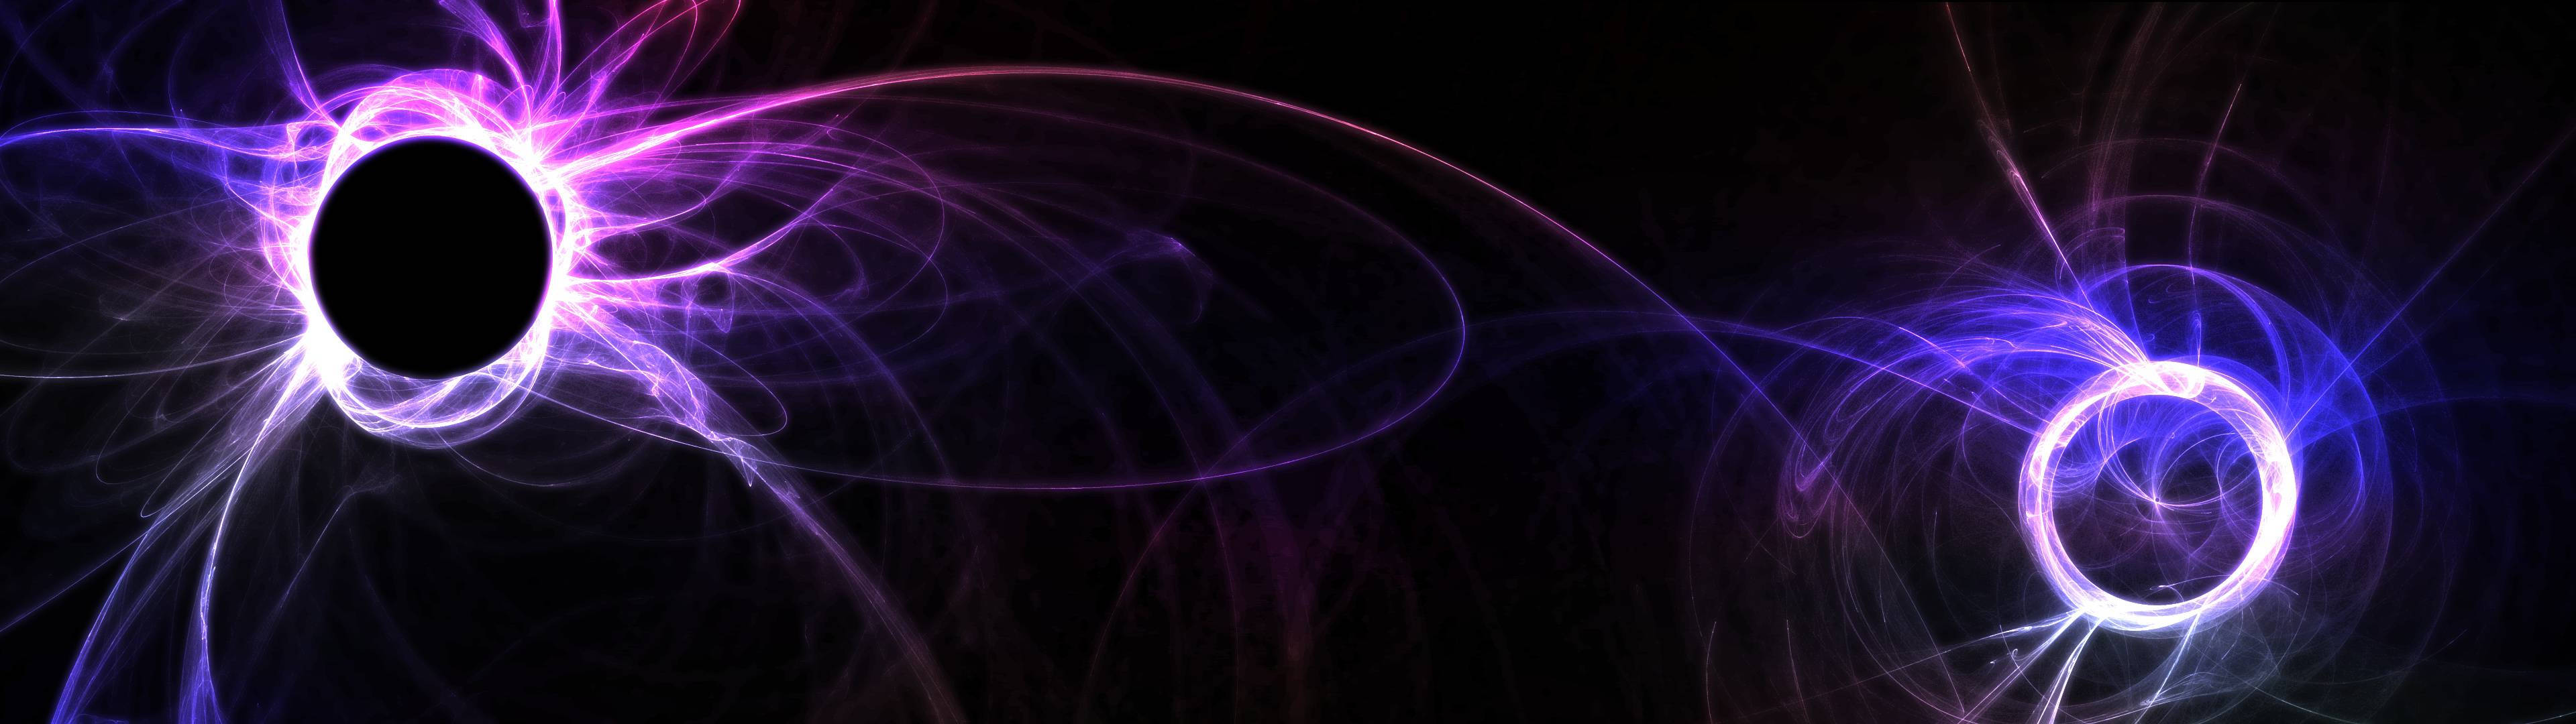 3840x1080 Hd Dual Monitor Abstract Rings Background